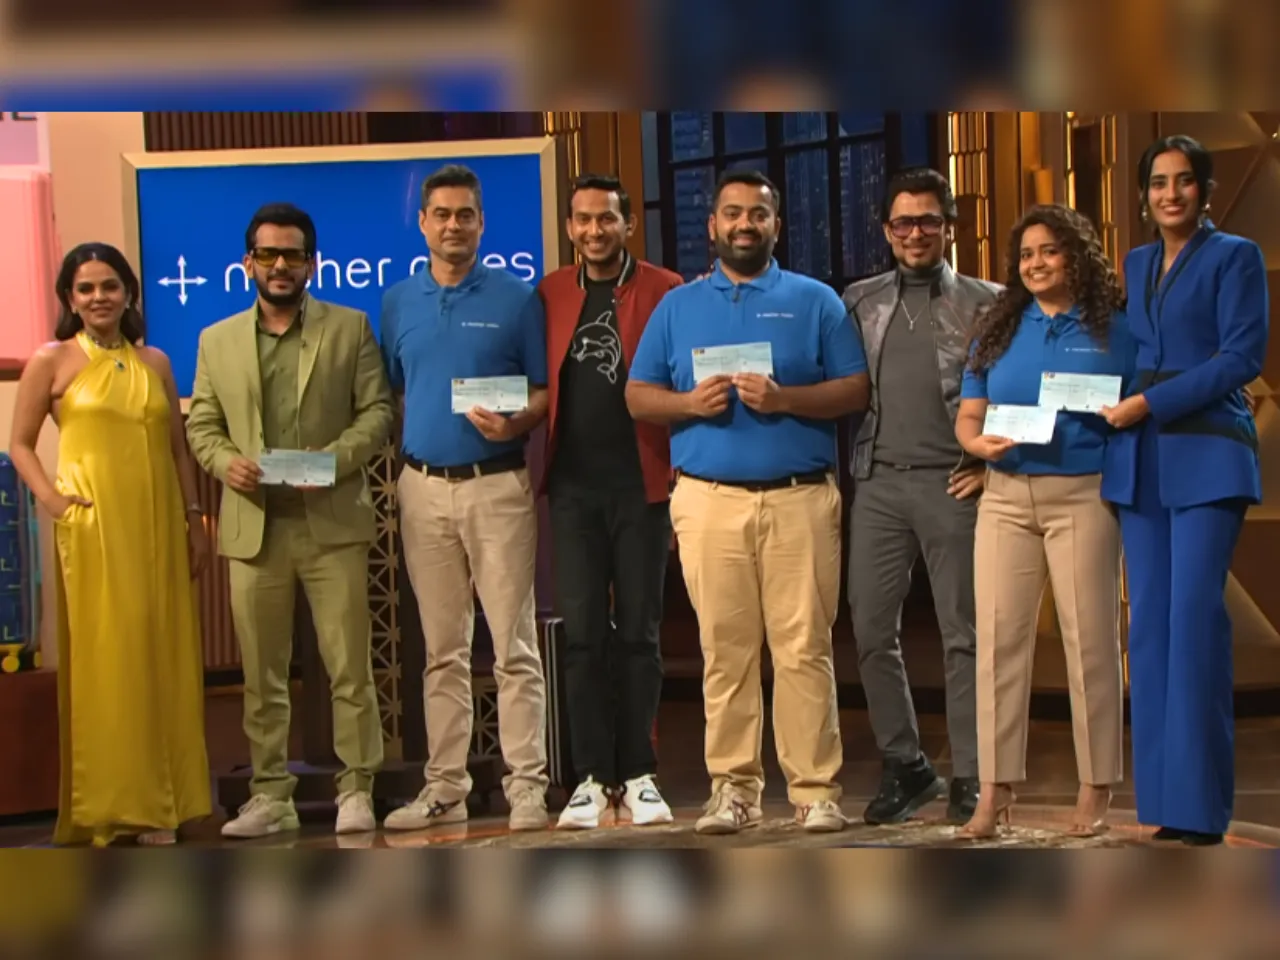 Luggage brand Nasher Miles secures Rs 3 crore in funding on Shark Tank India at Rs 200 crore valuation